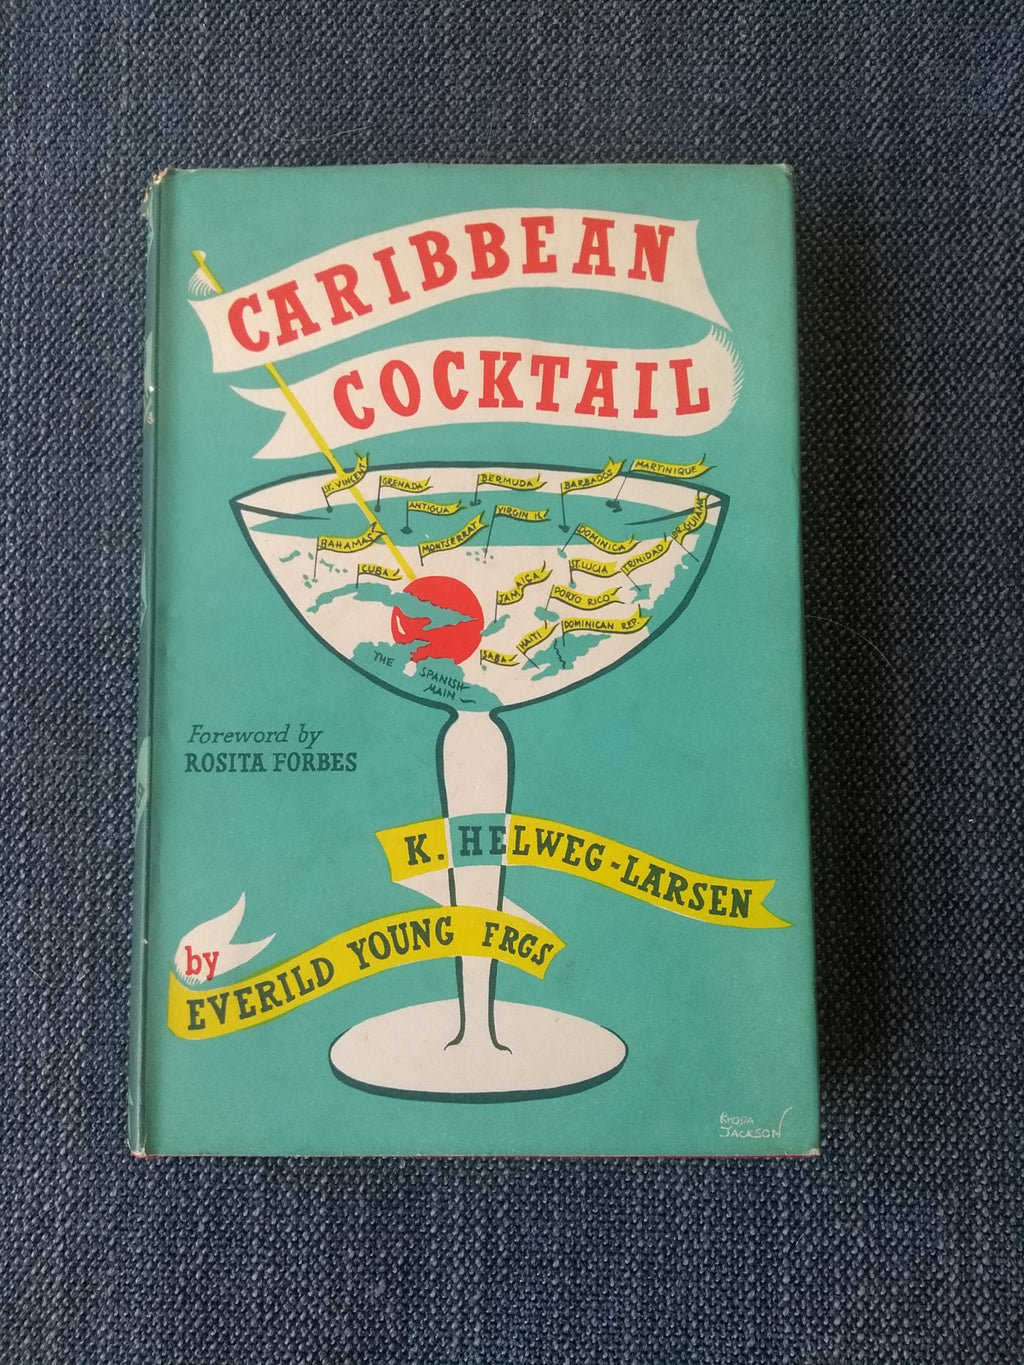 Caribbean Cocktail, by K. Helweg-Larsen and Everild Young